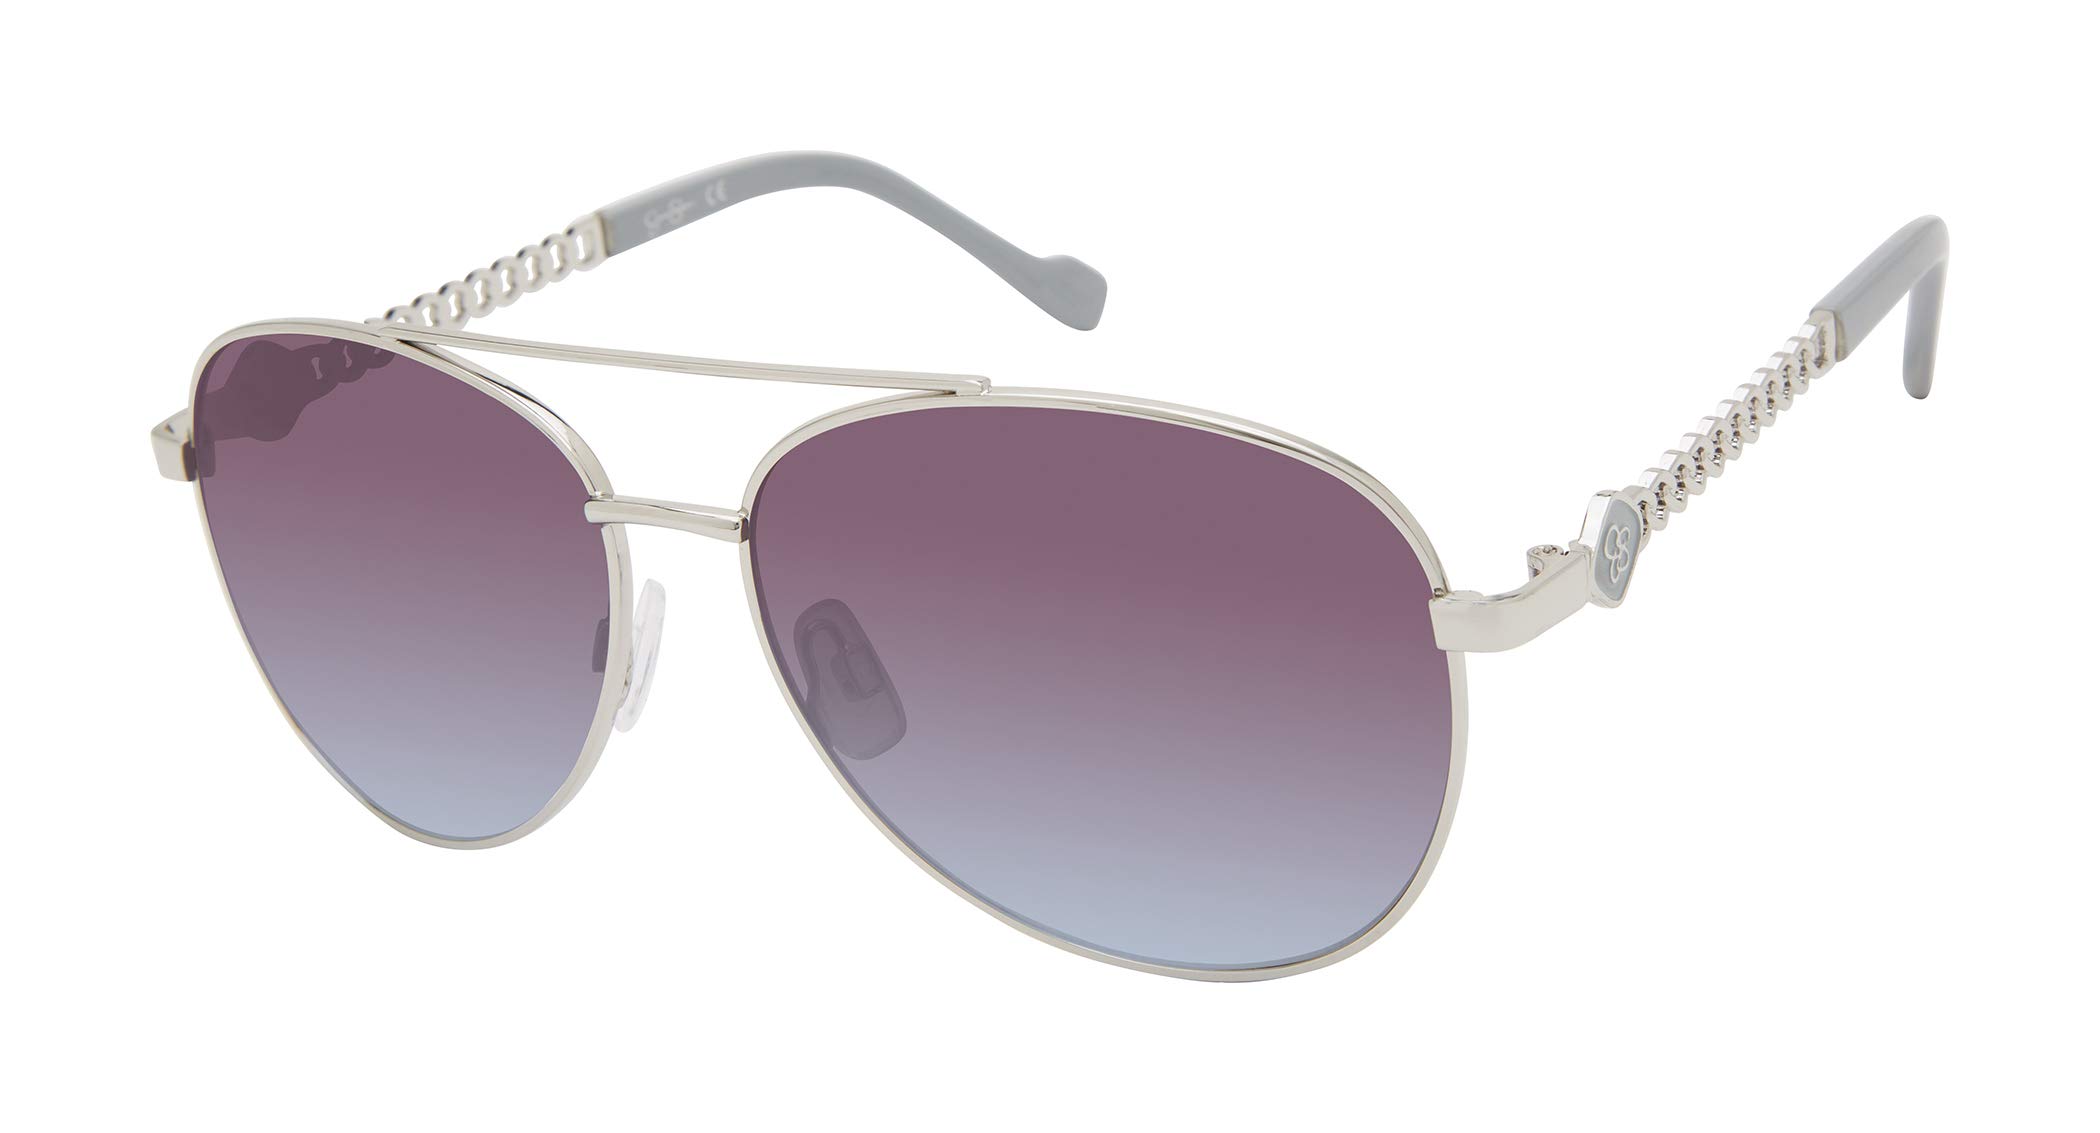 Jessica Simpson J5982 Dashing Metal Aviator Sunglasses with UV Protection glam gifts for Women, 60 mm, Silver